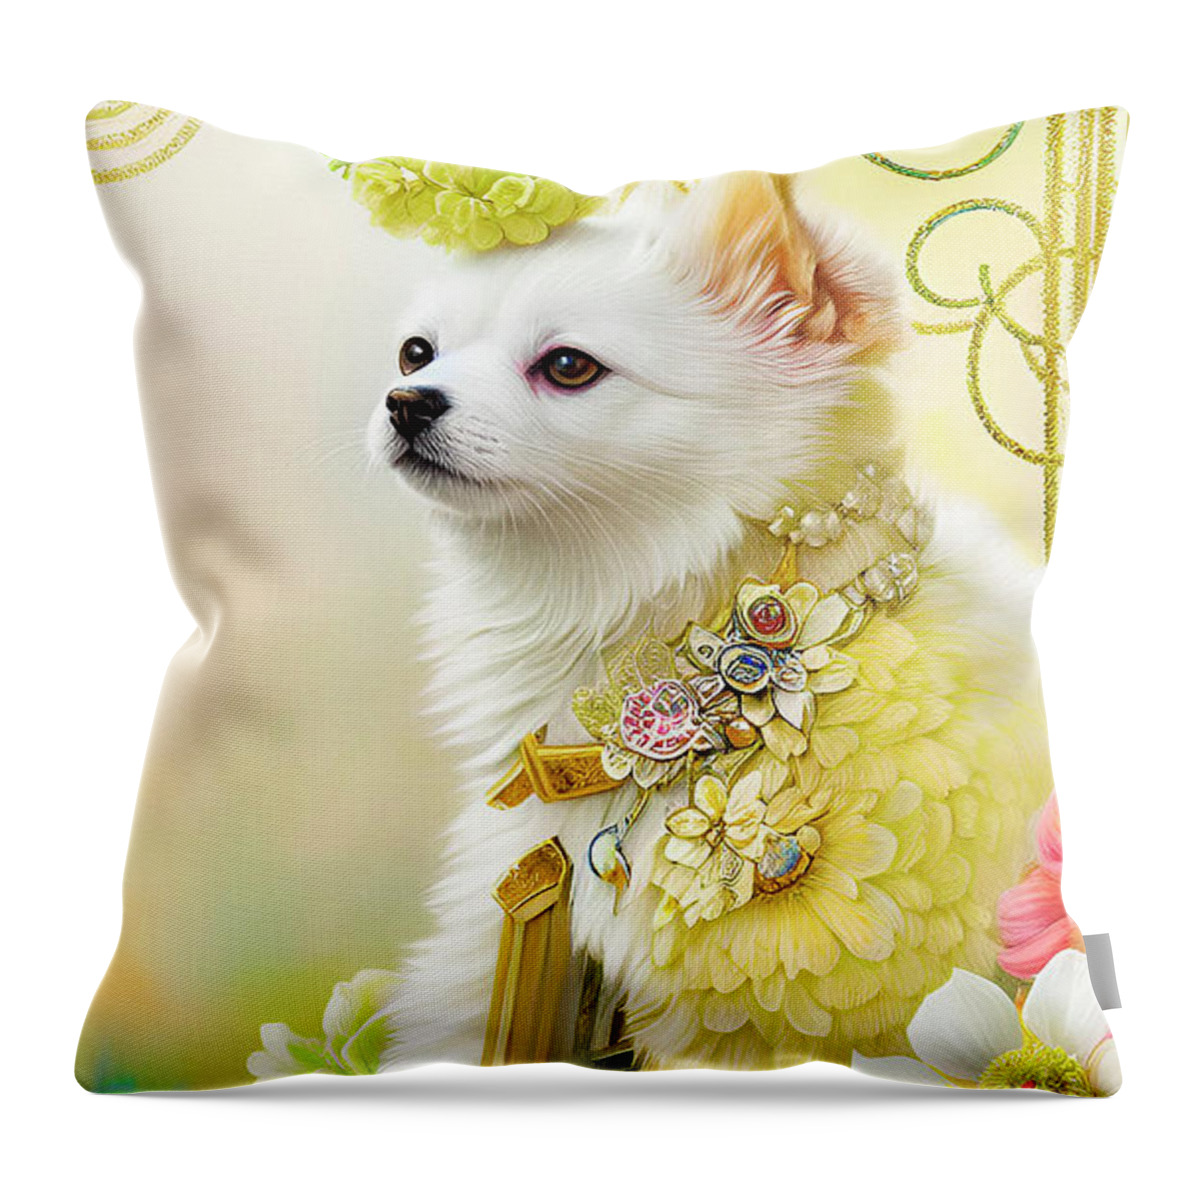 Digital Art Throw Pillow featuring the digital art Dreams Of Heaven Ginette In Wonderland by Ginette Callaway